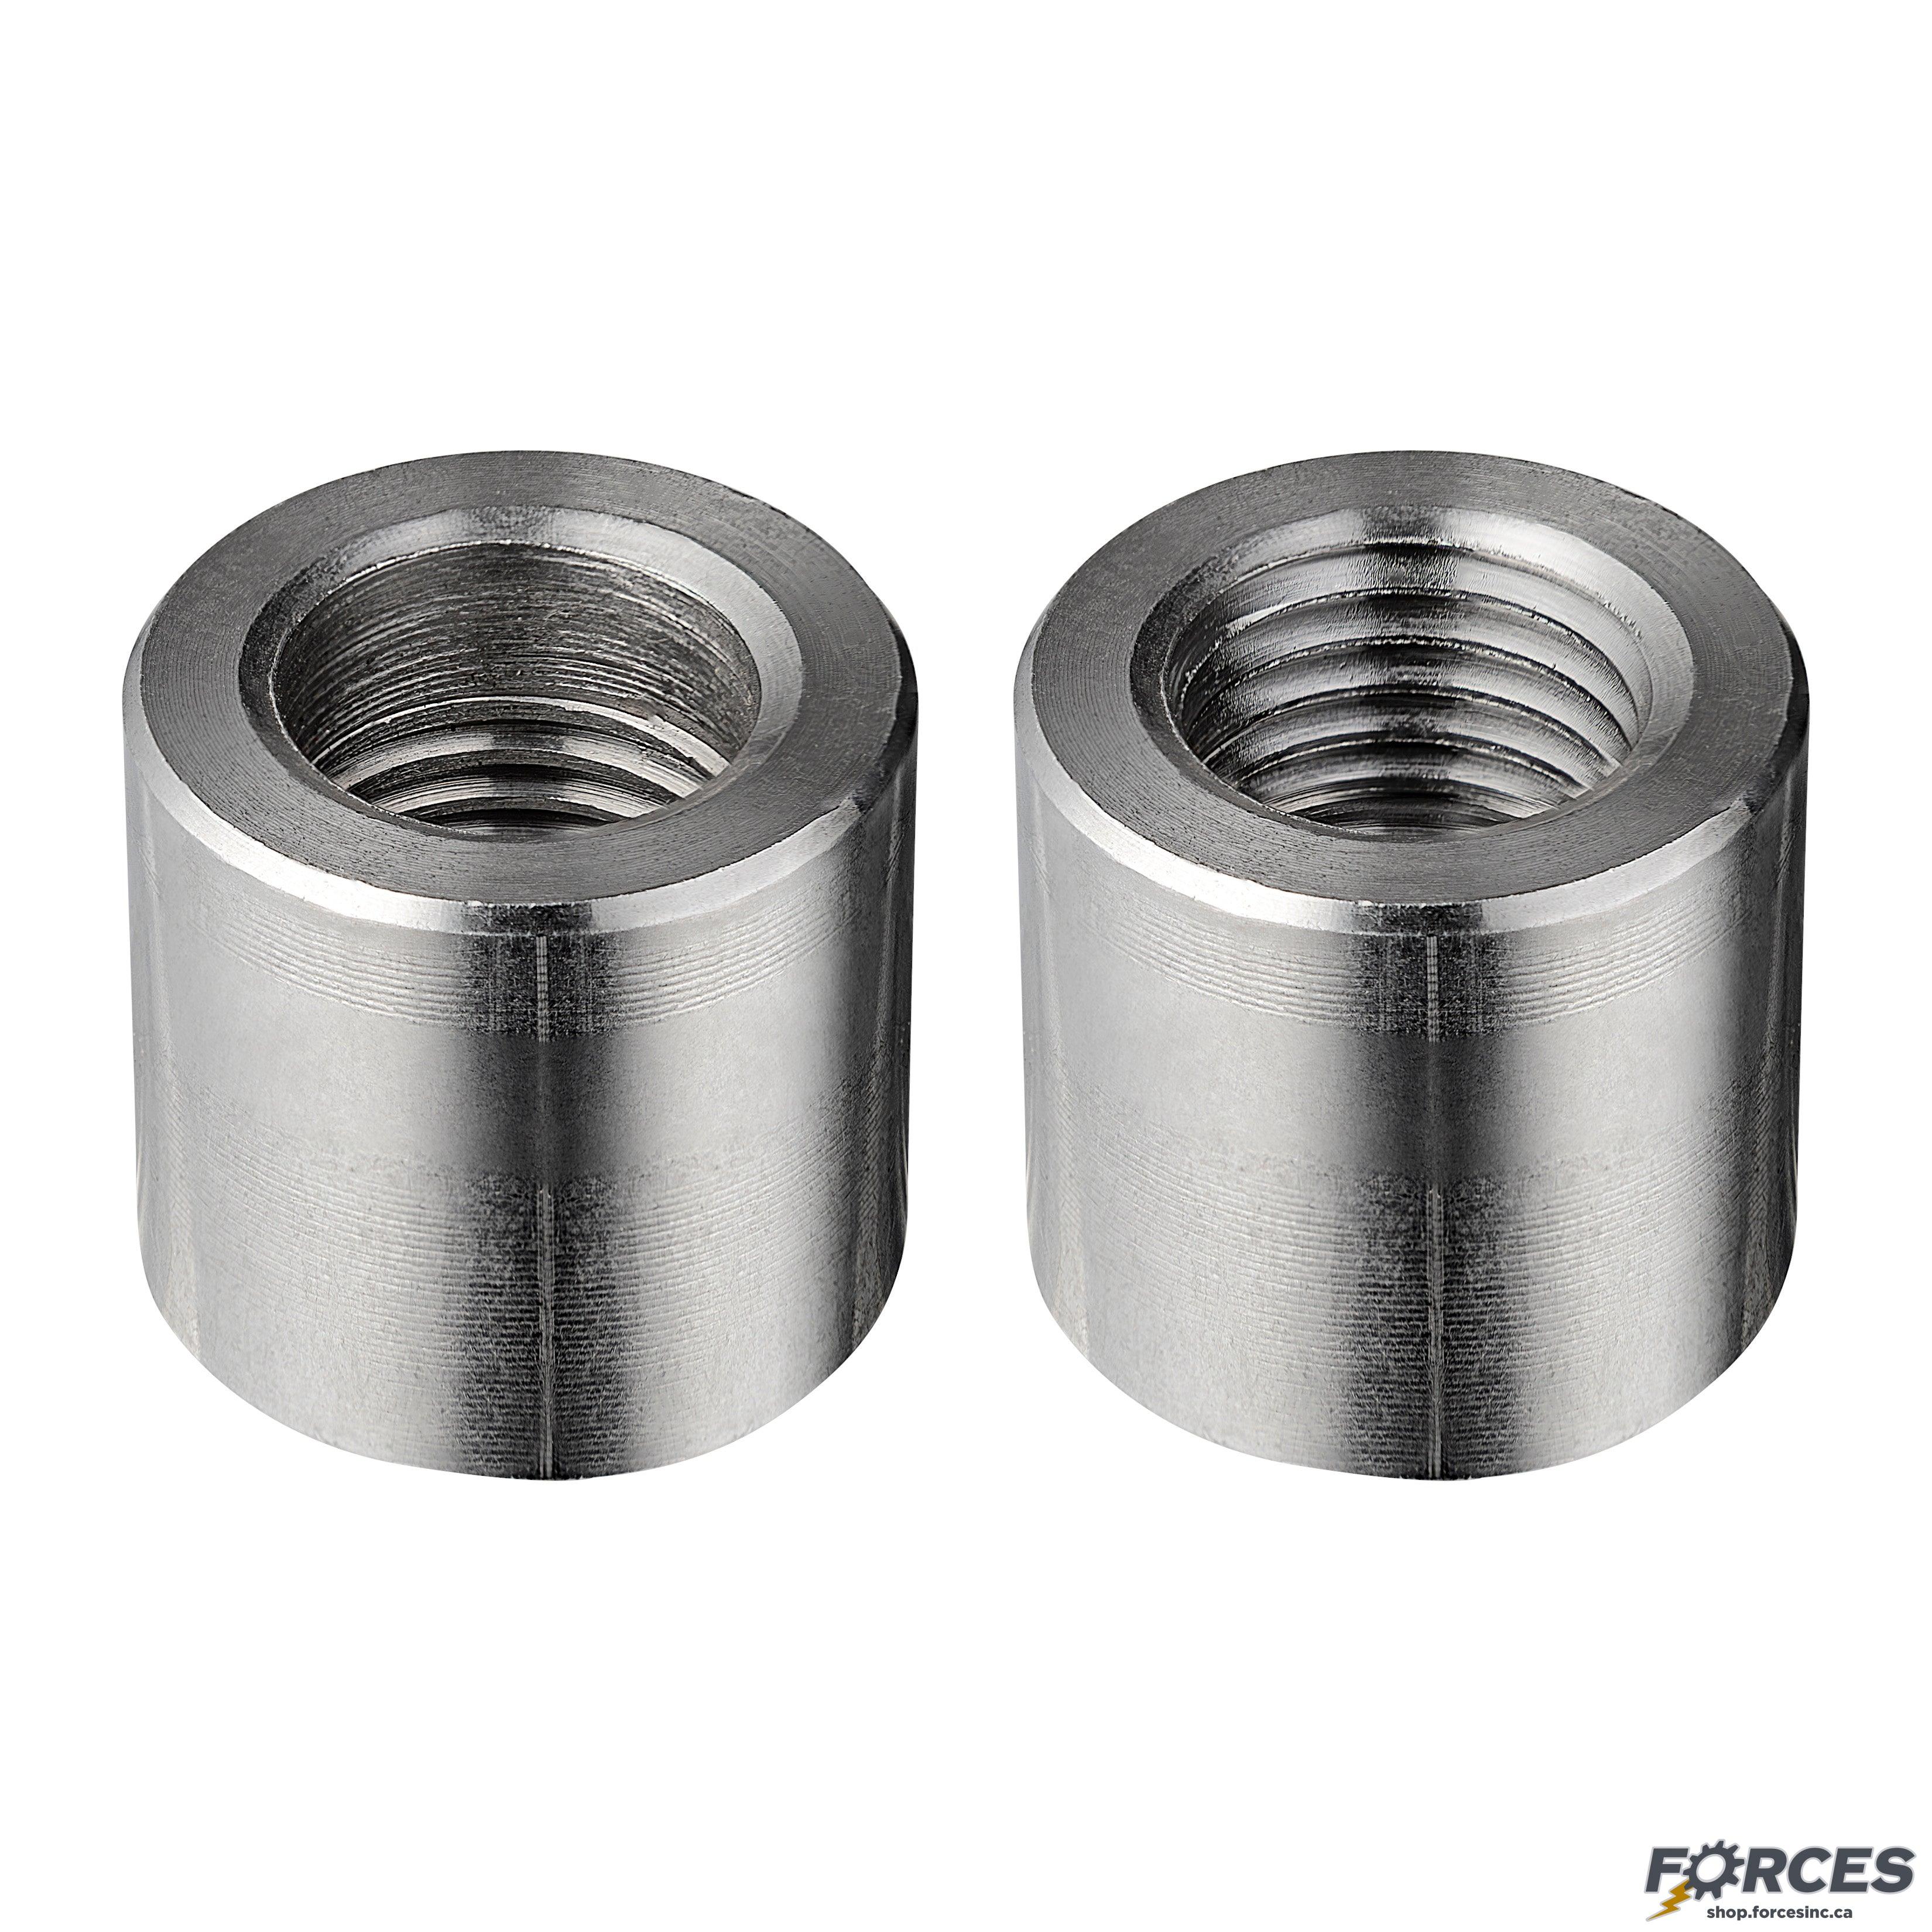 1-1/4" Half-Coupling NPT #3000 - Stainless Steel 316 - Forces Inc